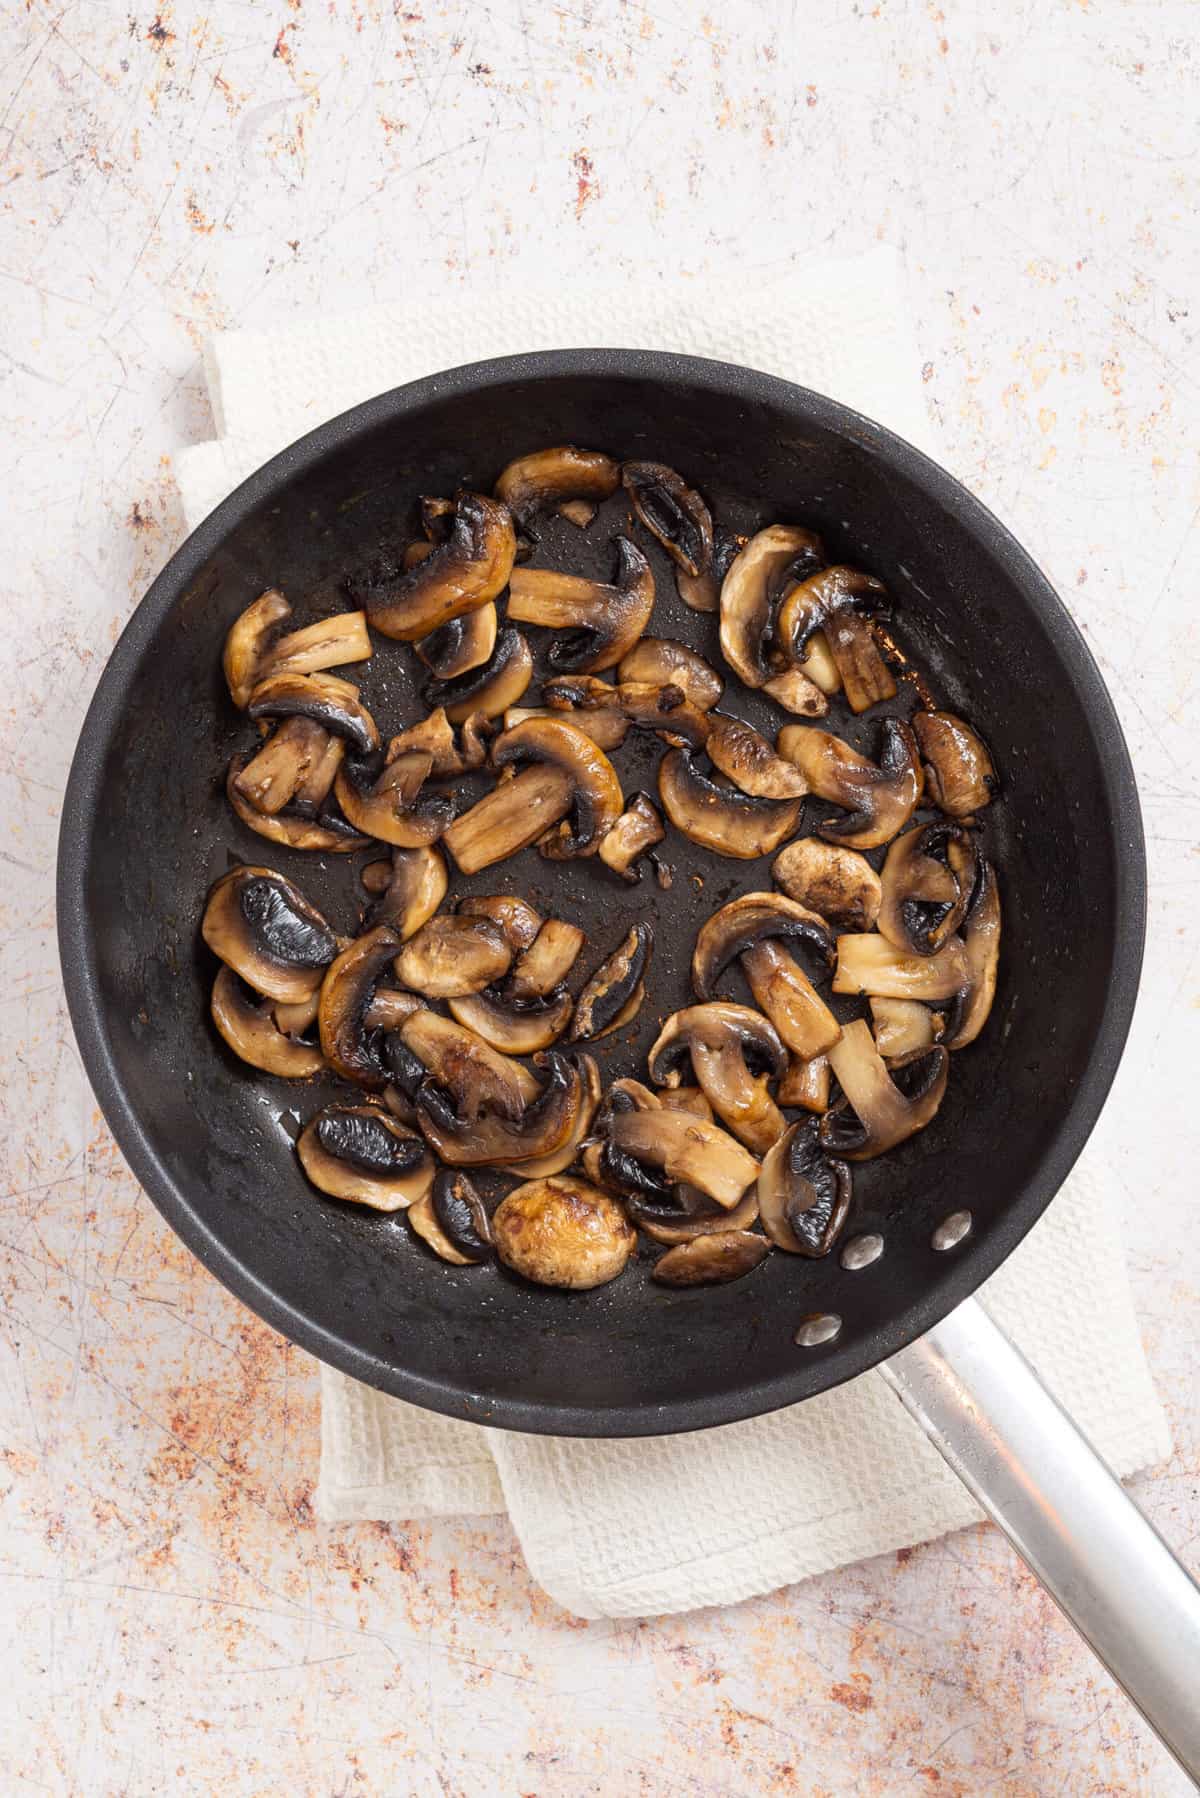 An overhead image of mushrooms cooked on a skillet.